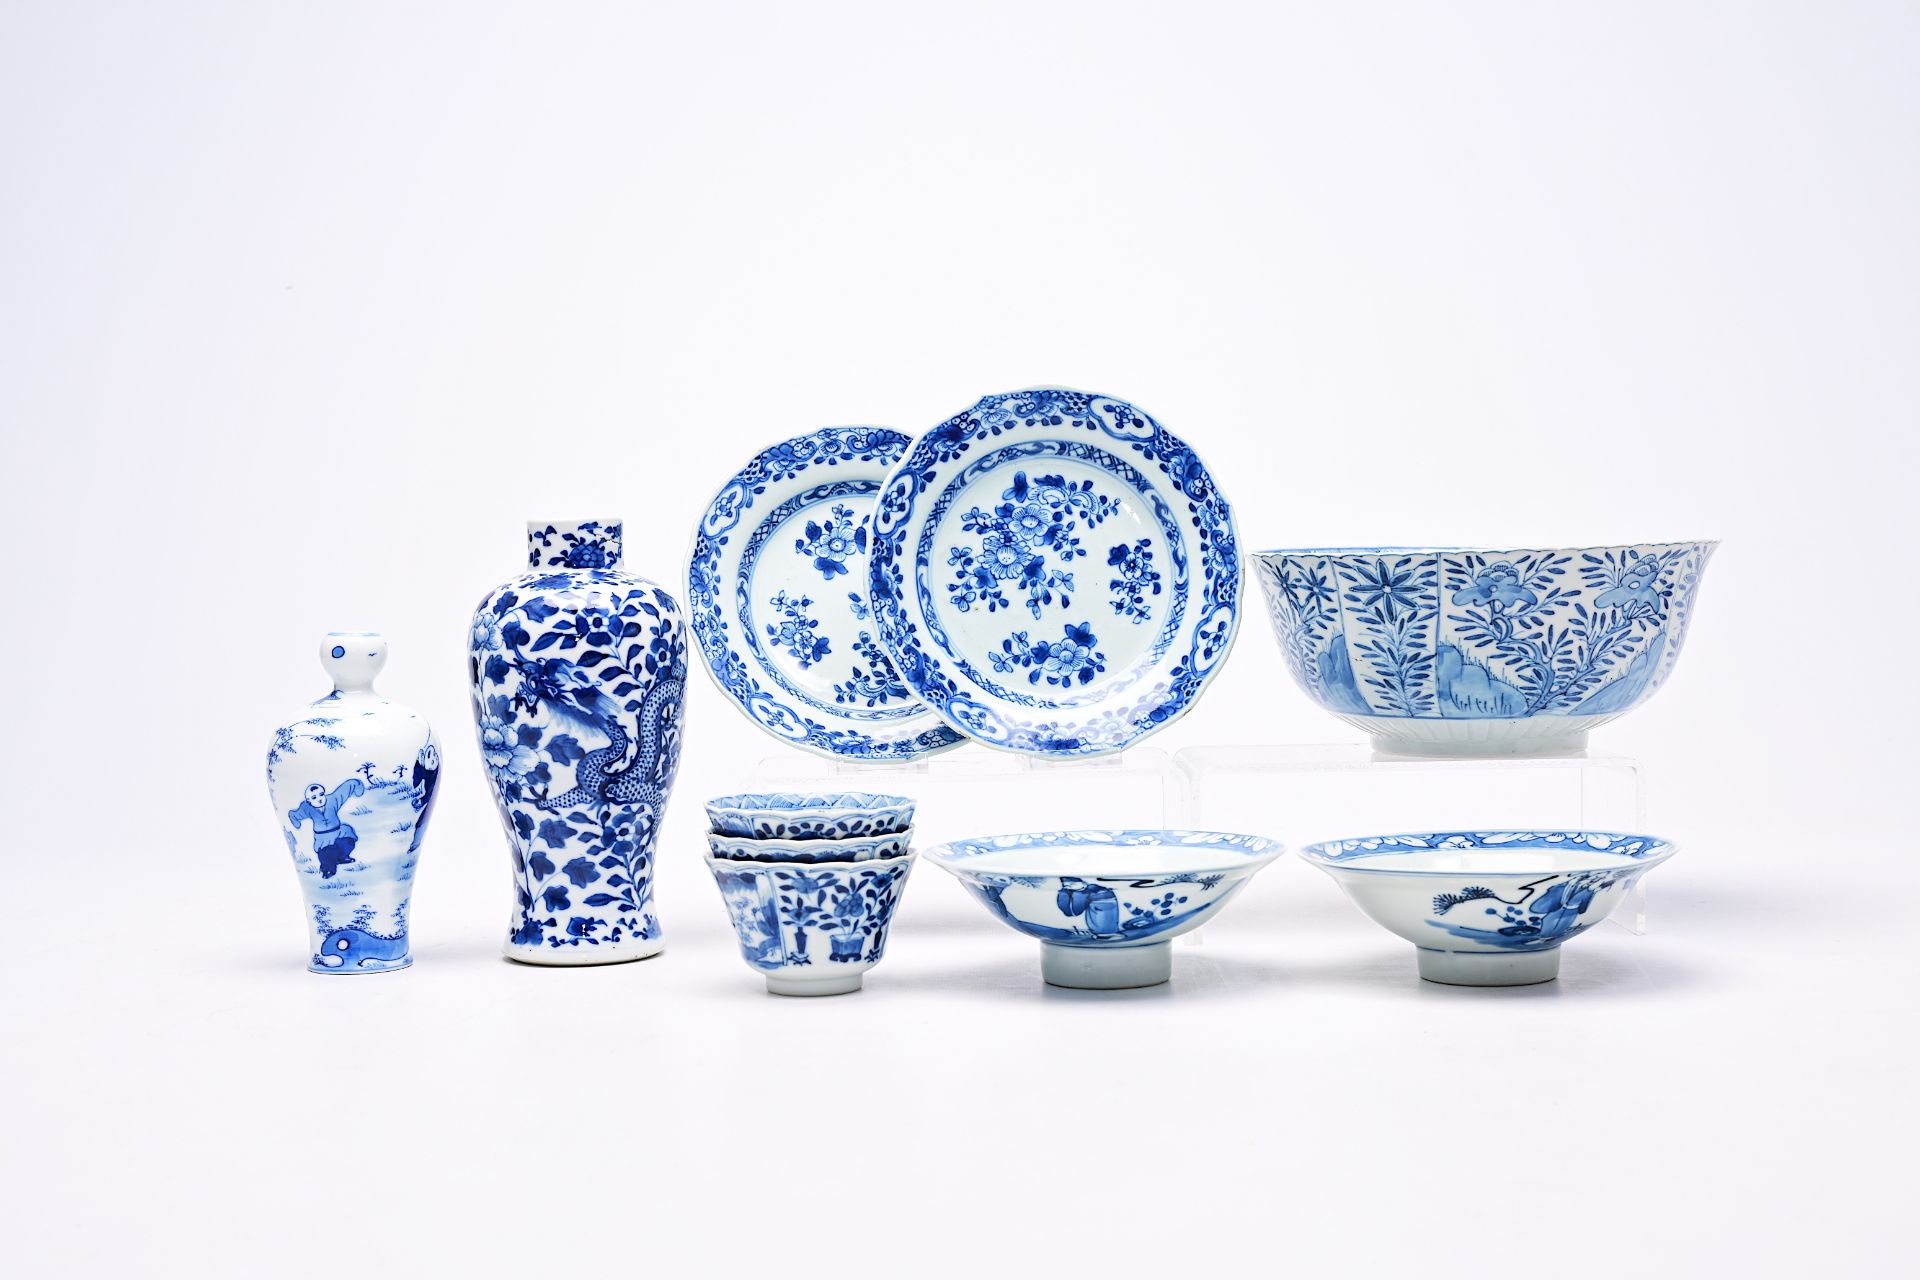 A varied collection of Chinese blue and white porcelain with floral design and figures in a landscap